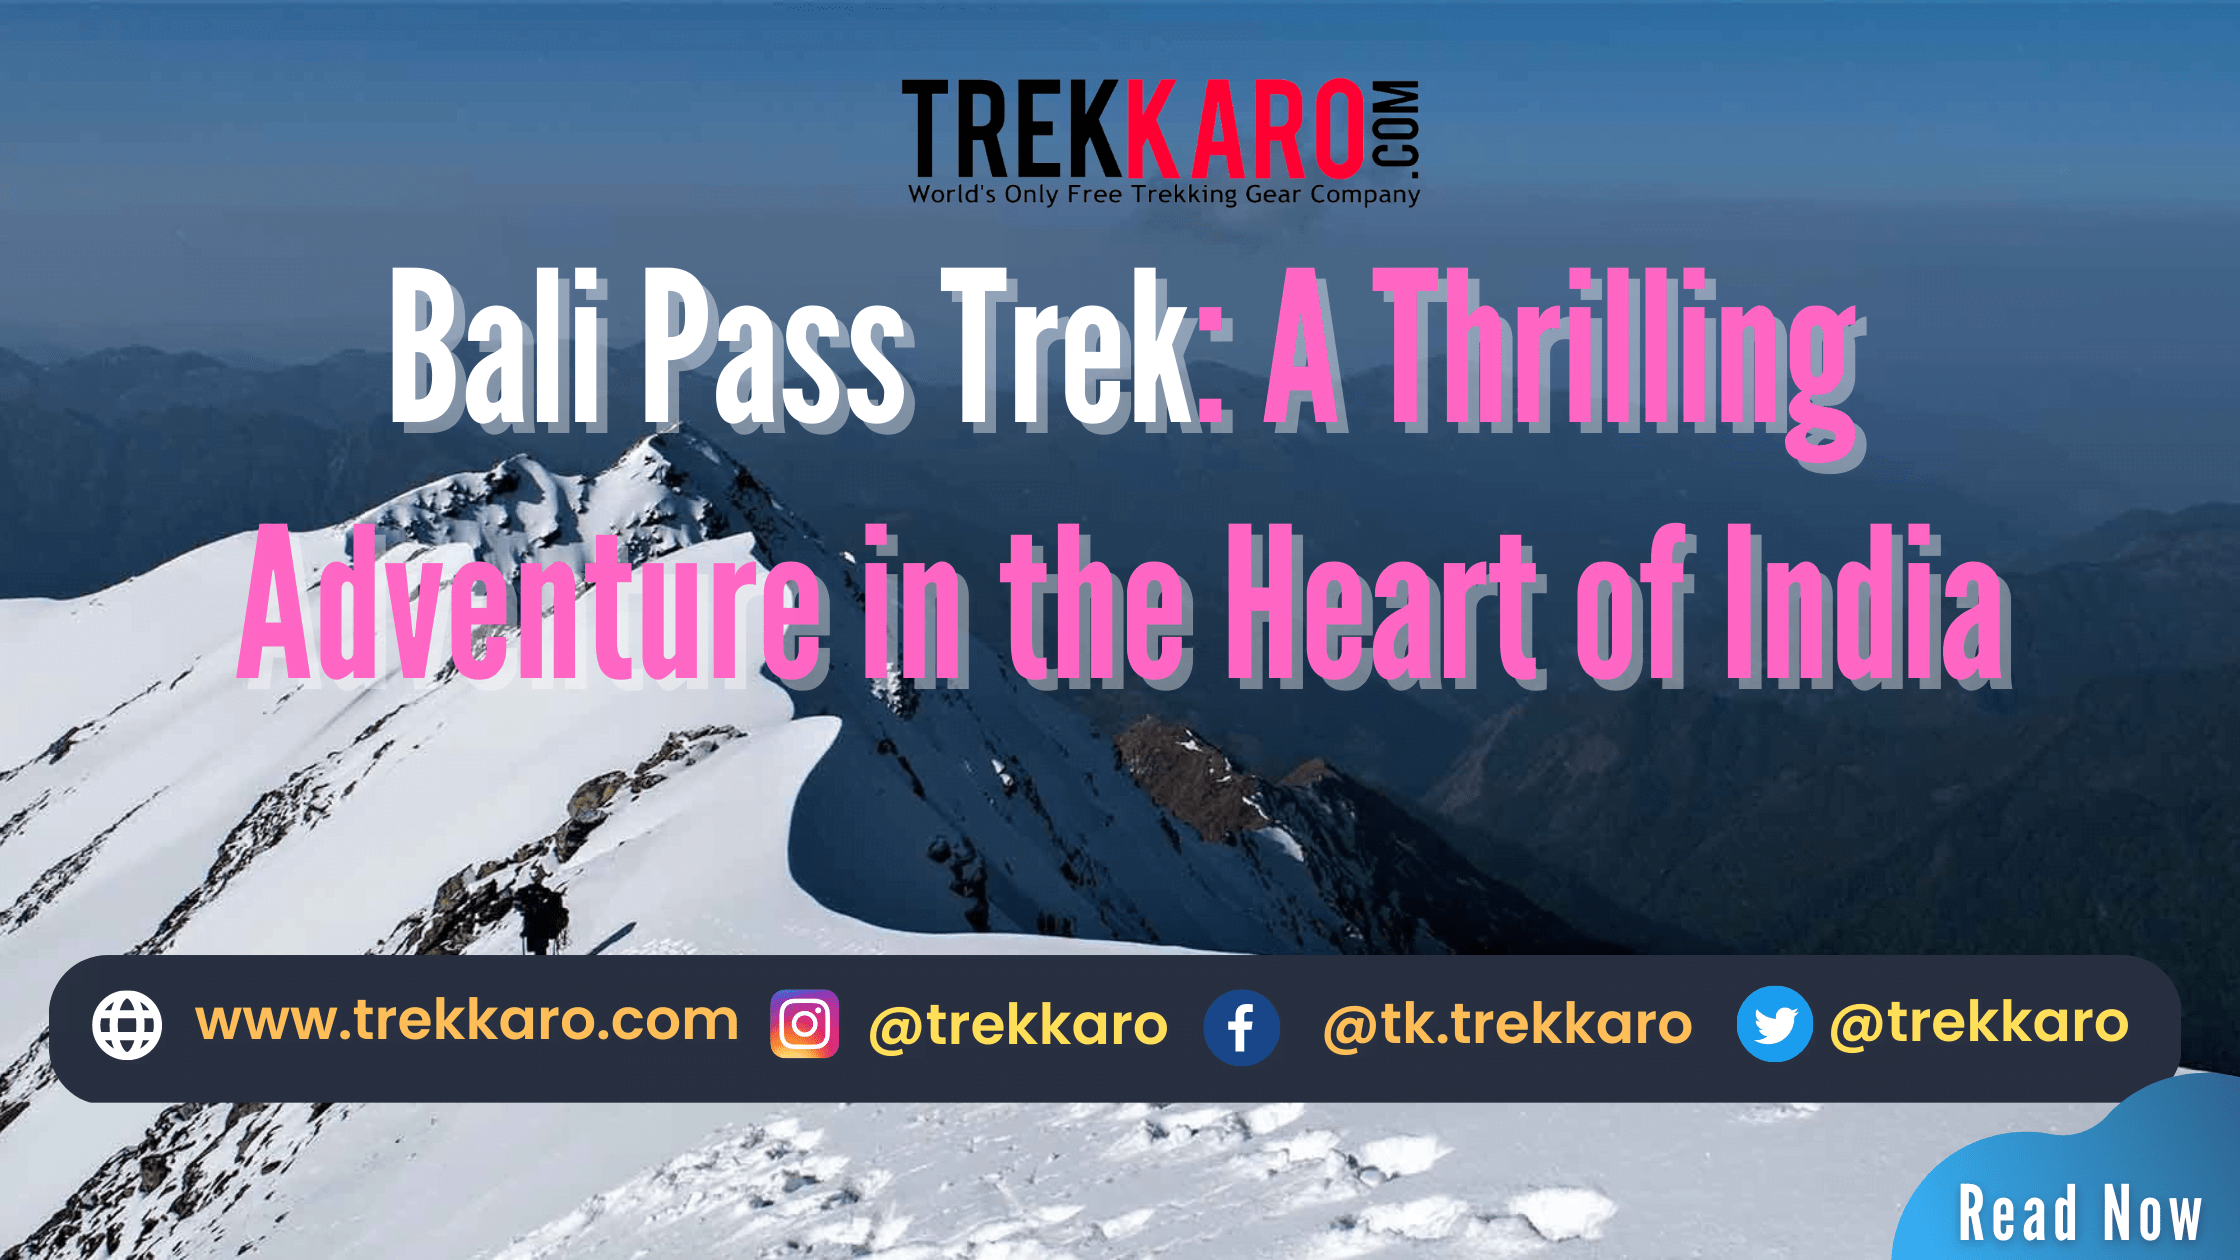 Bali Pass Trek: A Thrilling Adventure in the Heart of India